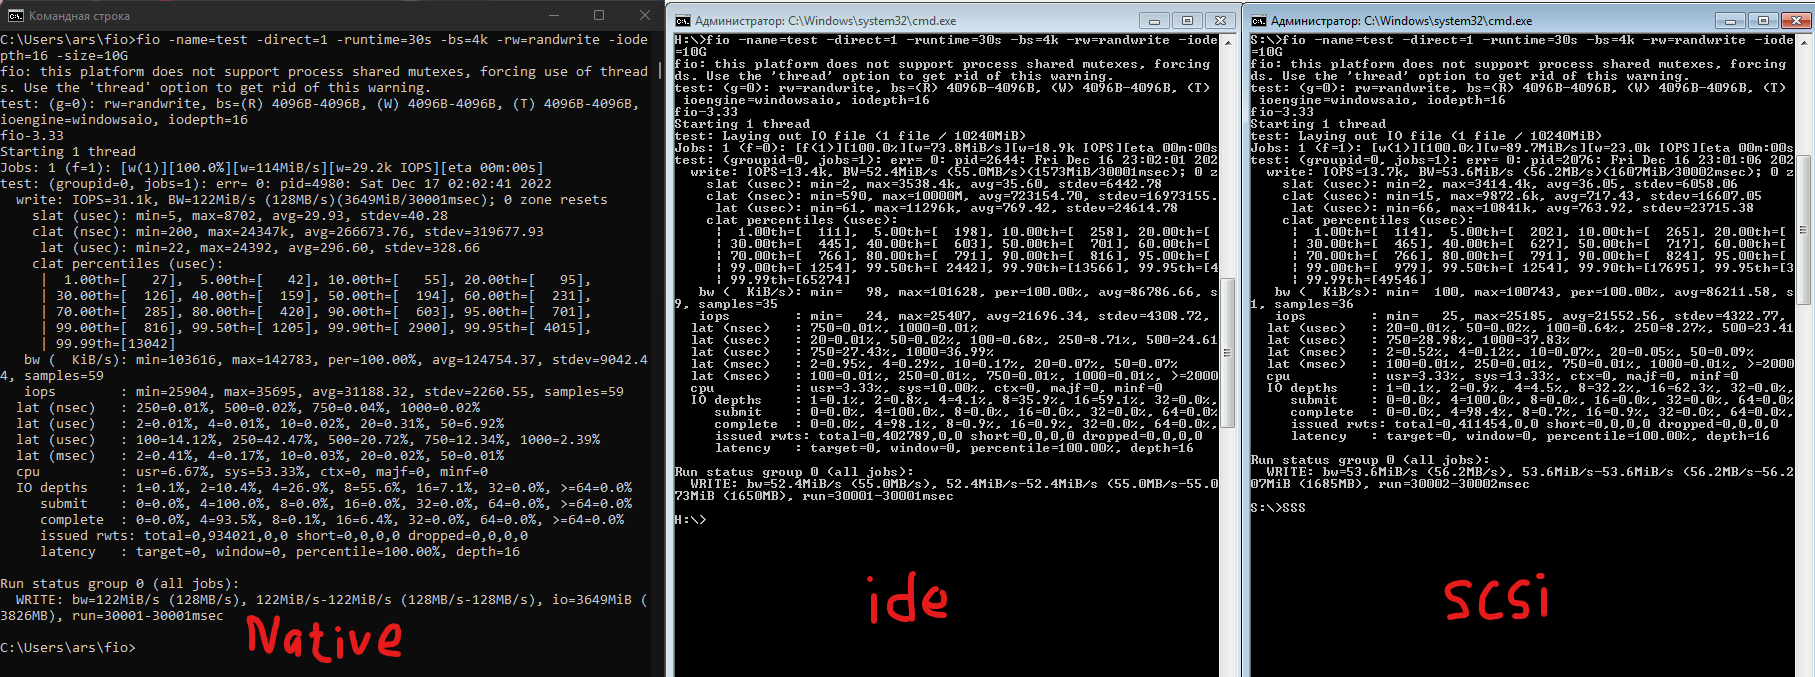 fio-win11-hyperv1-ssd-native-ide-scsi-iodepth16.png